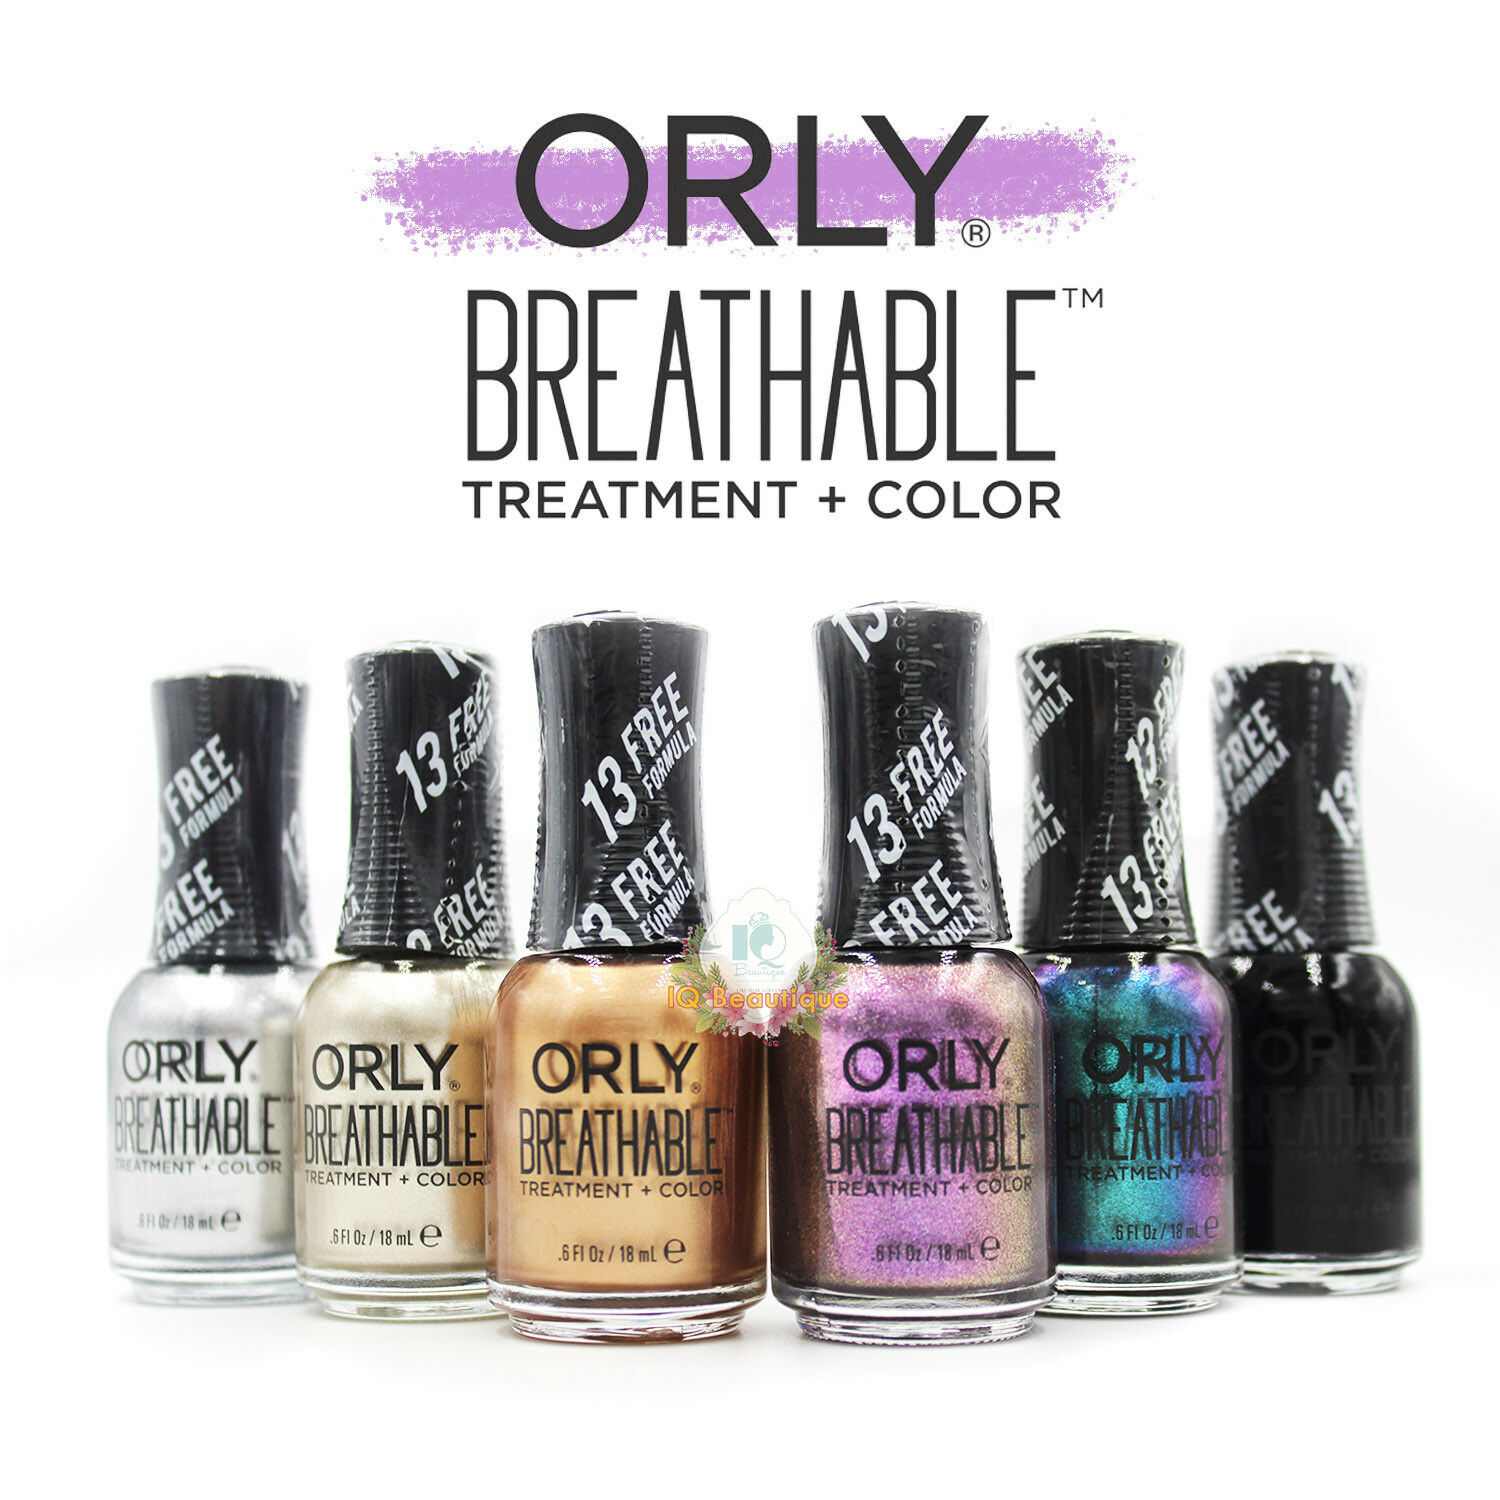 Orly Breathable Nail Polish + Treatment 0.6 Oz - Spring 2021 Updated!